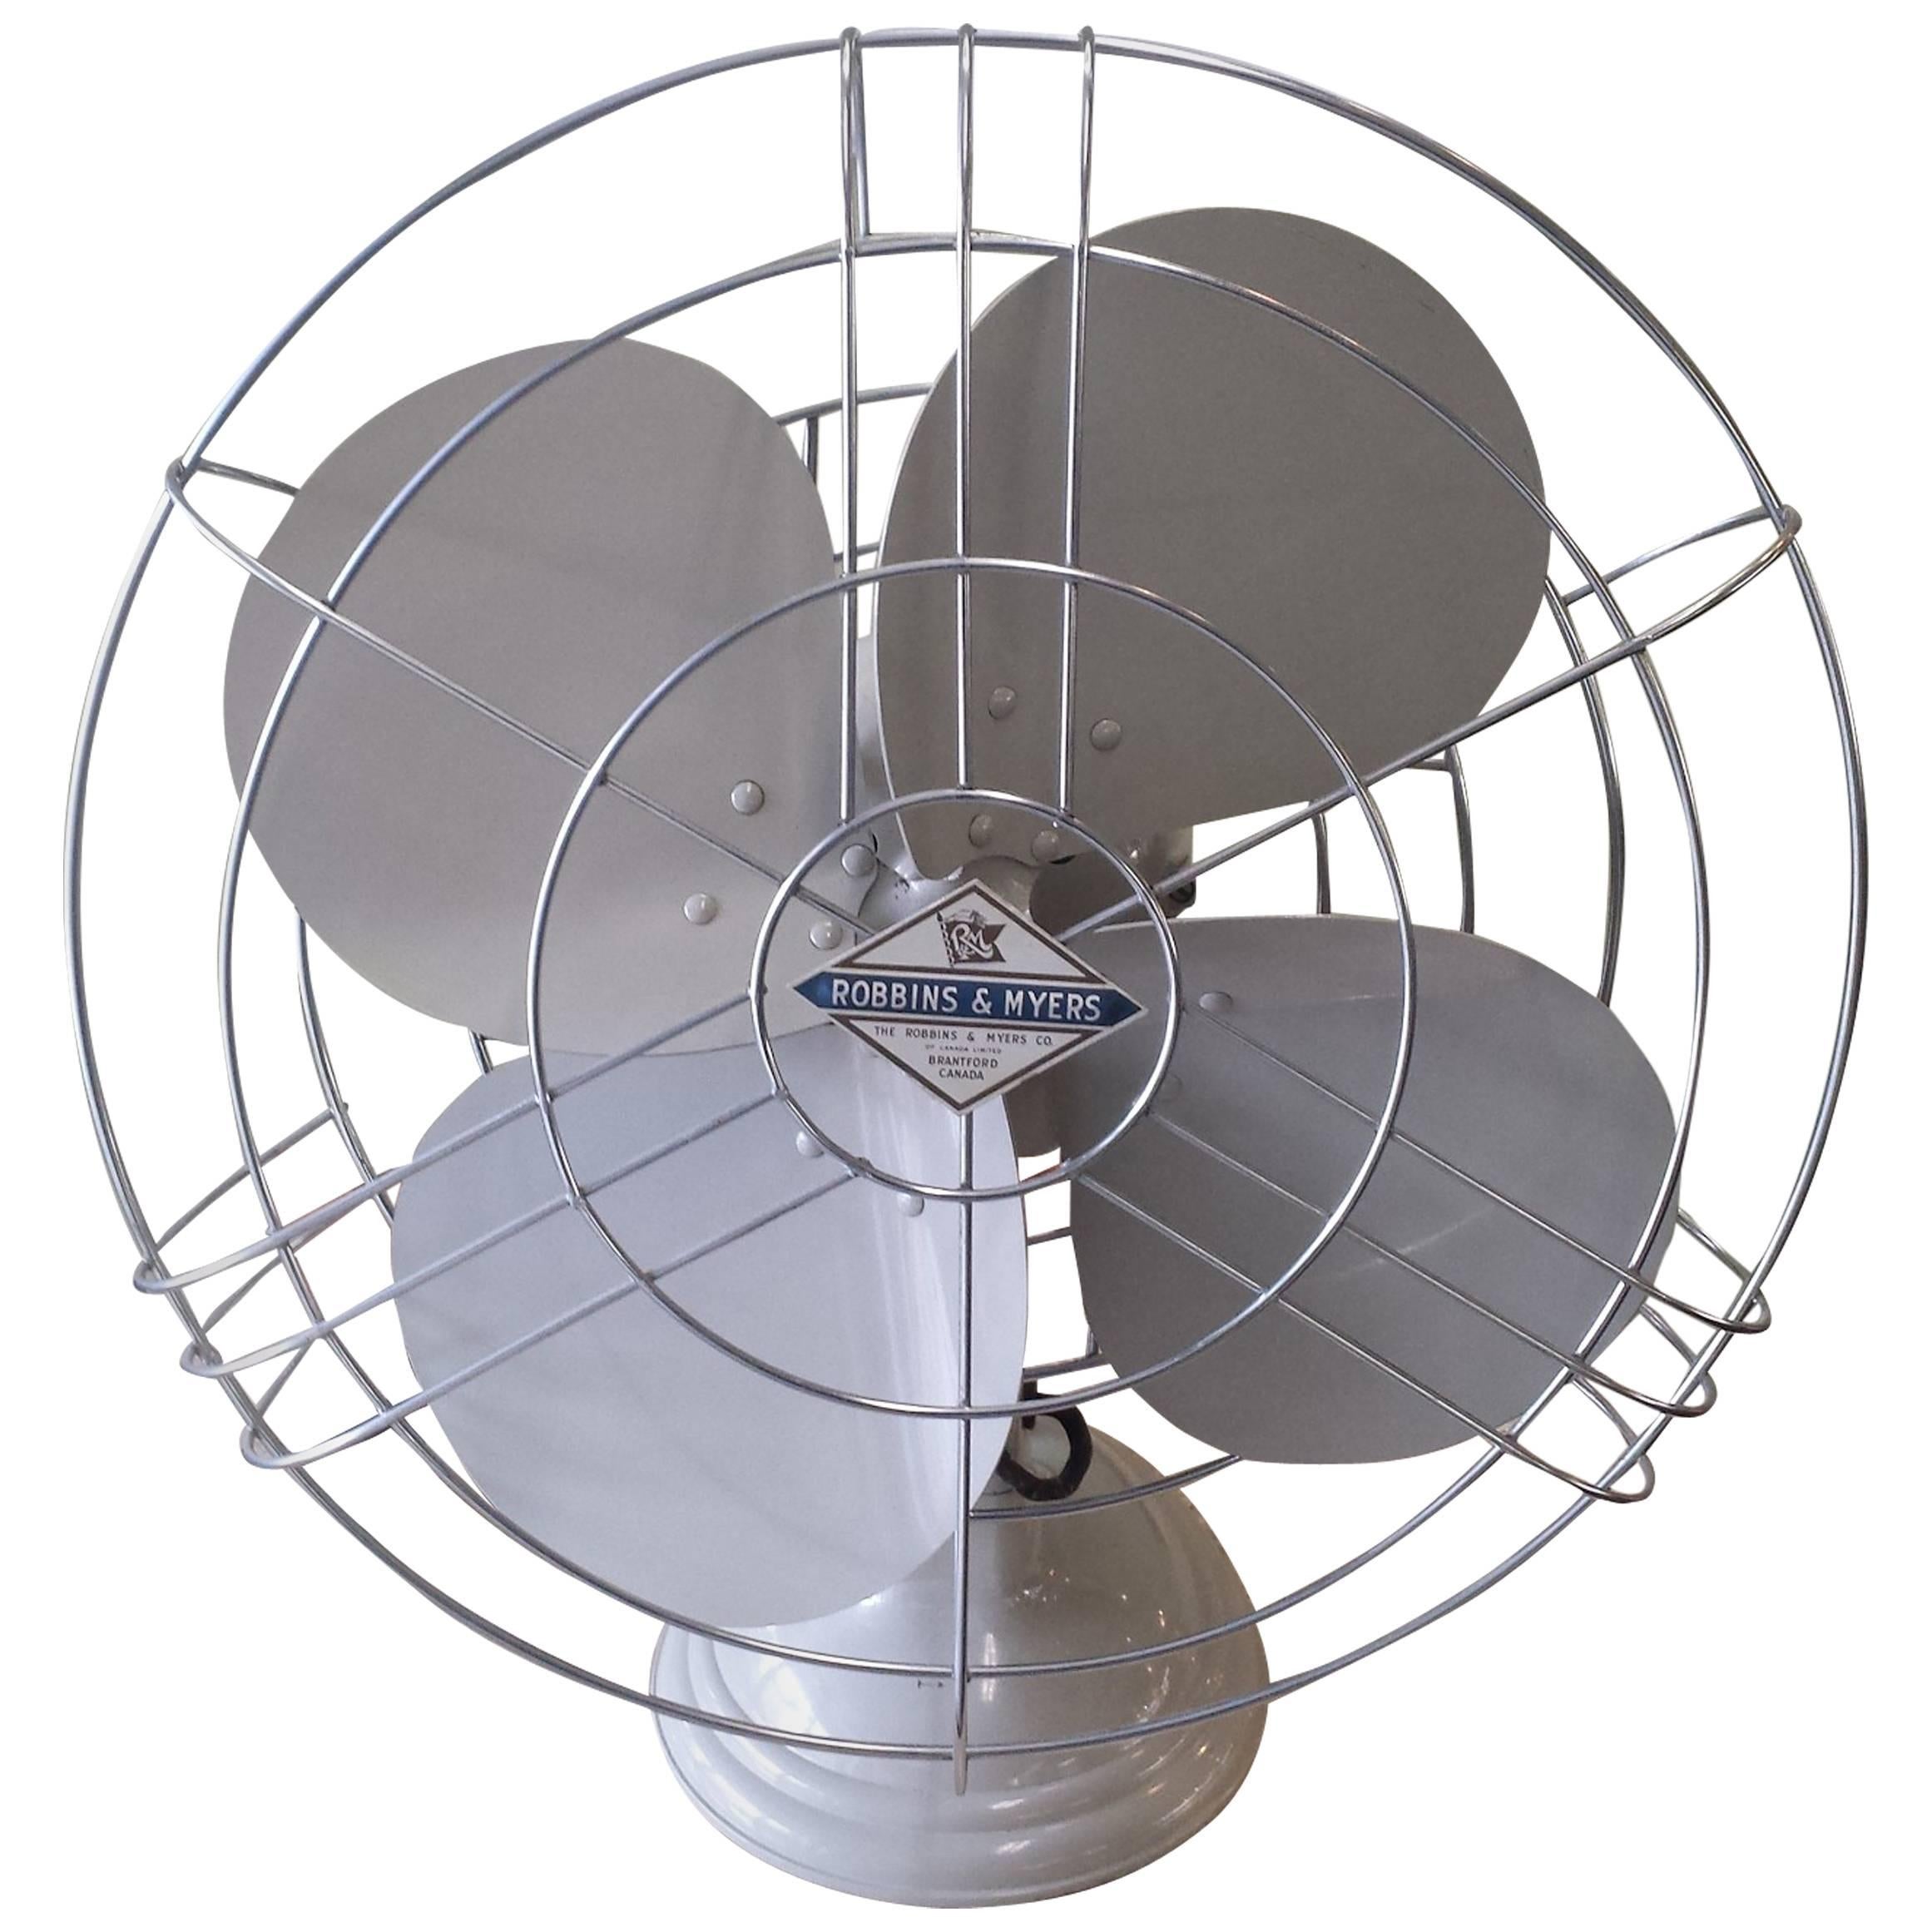 Robbins & Myers Mid-Century Electric Three-Speed Industrial Table Fan, 1950s